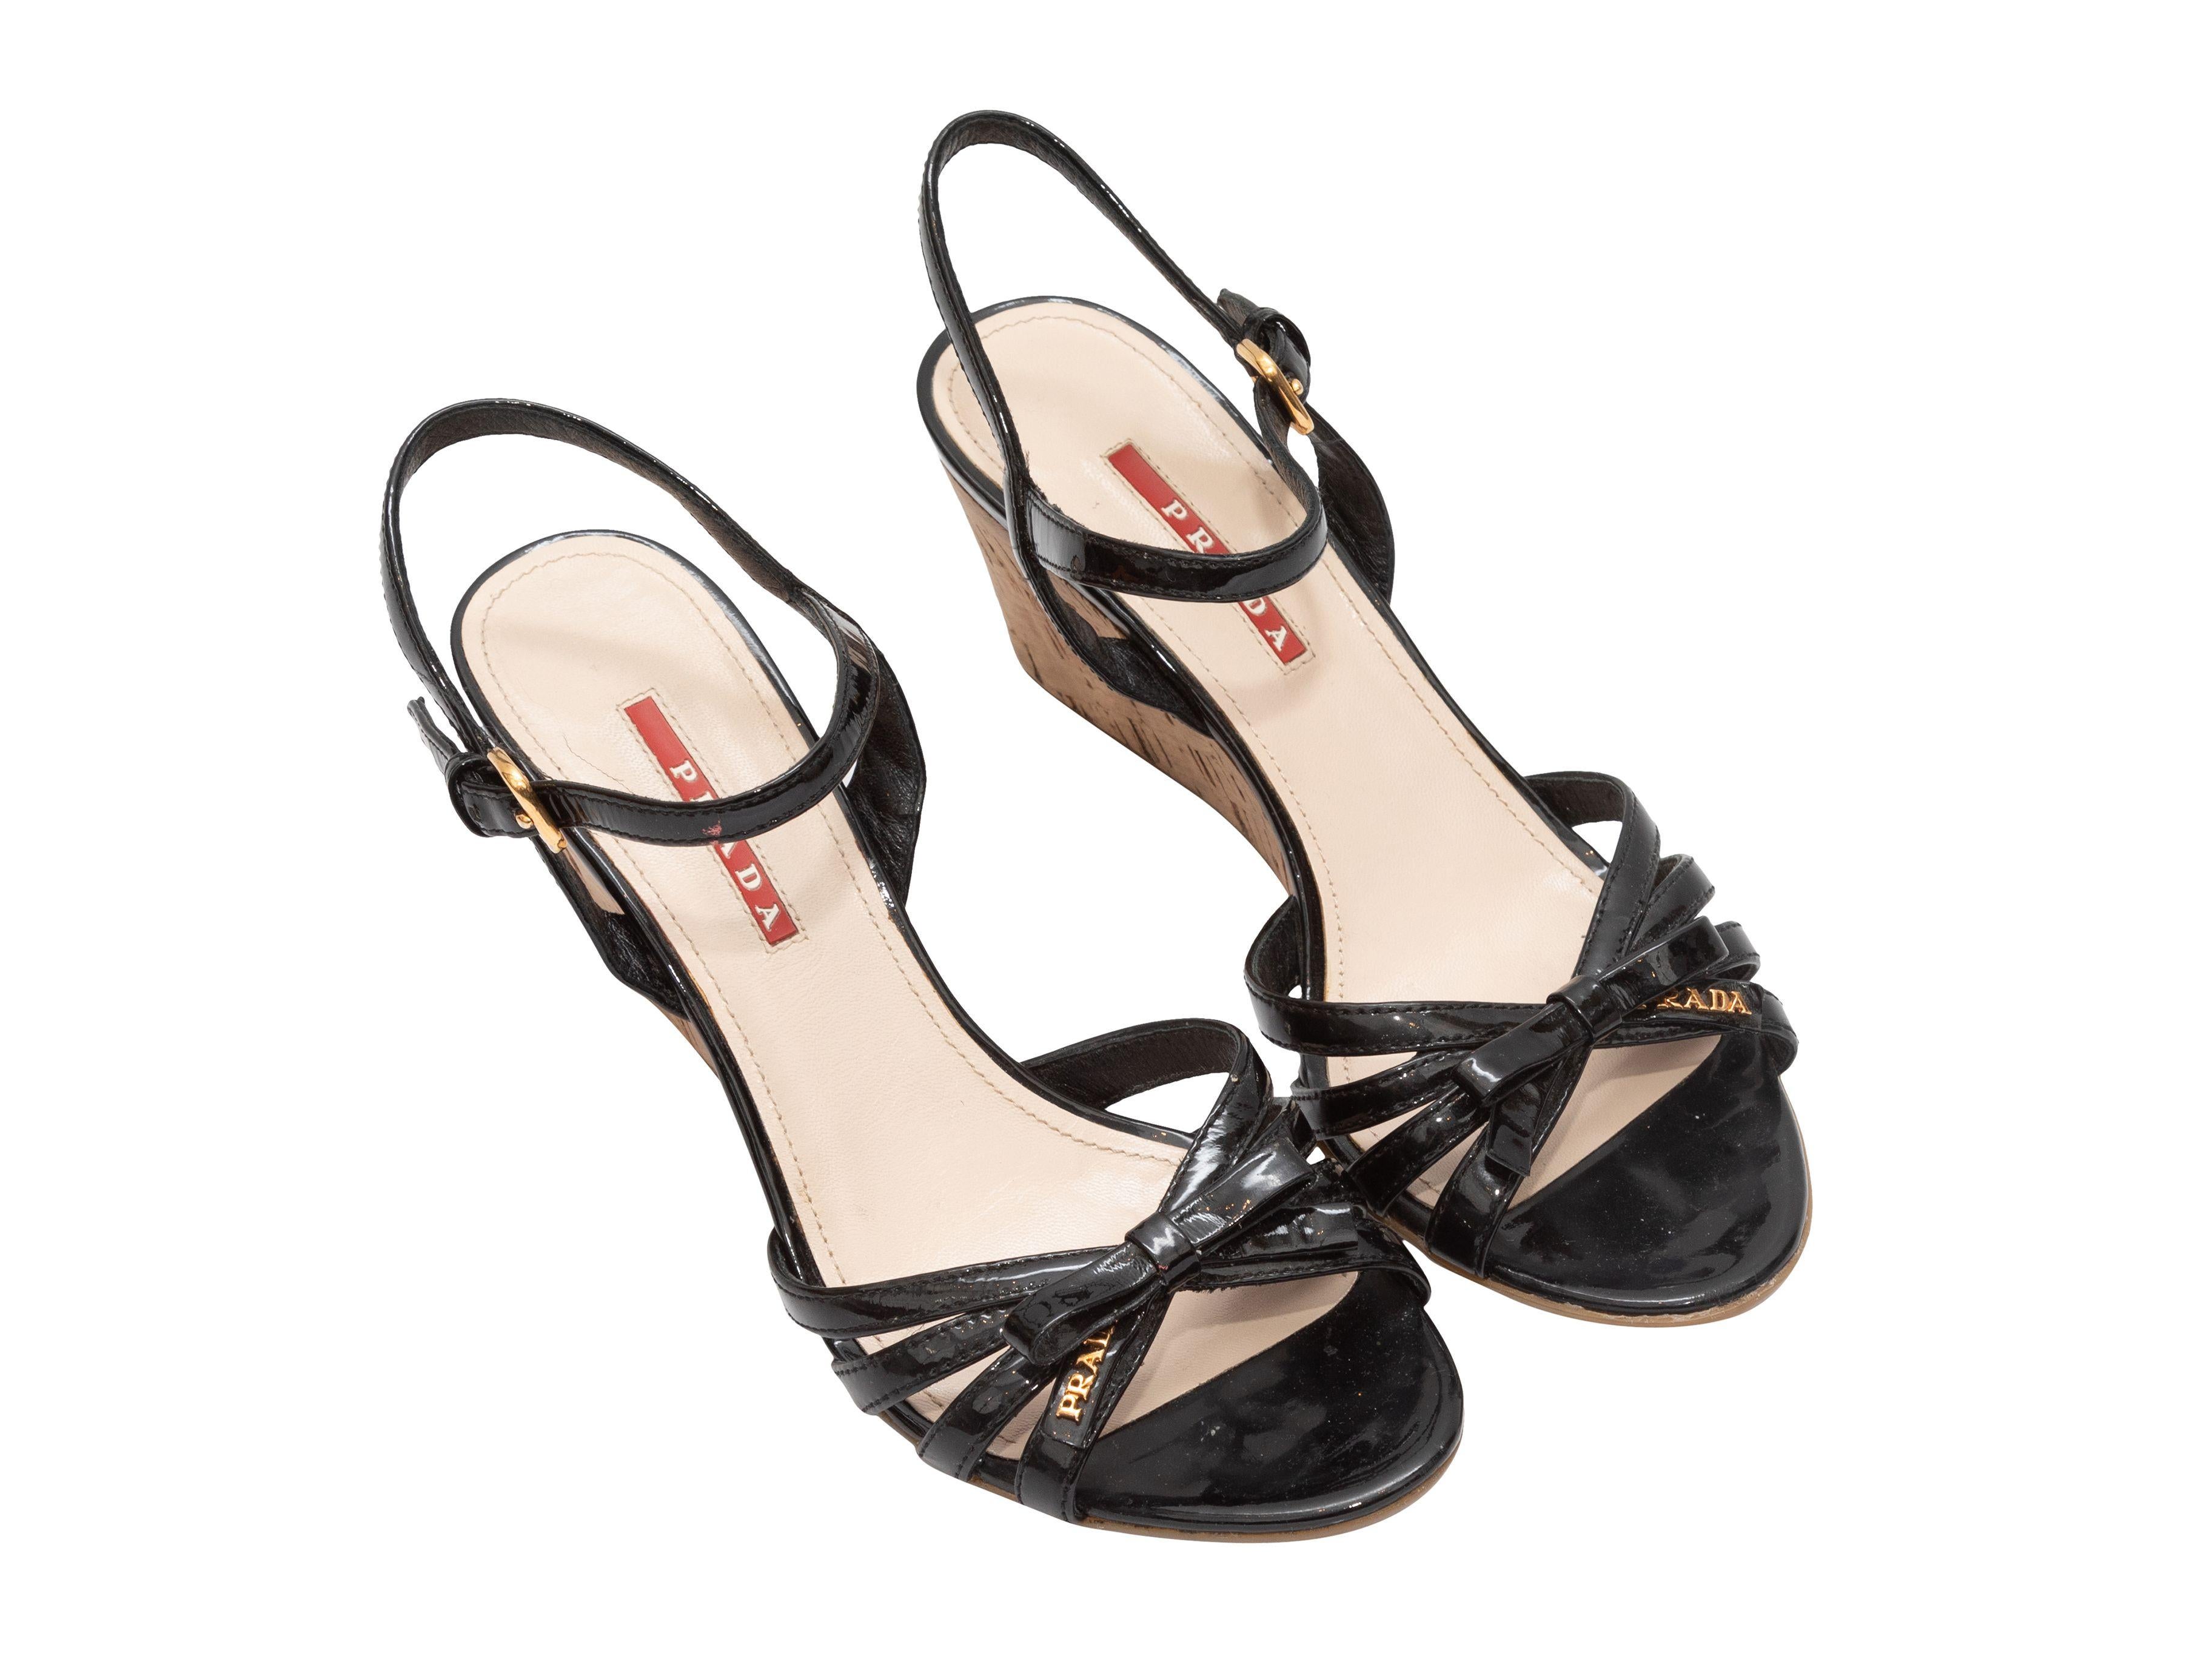 Product Details: Black patent leather bow wedge sandals by Prada. Gold-tone hardware. Cork soles. Buckle closures at ankle straps. 3